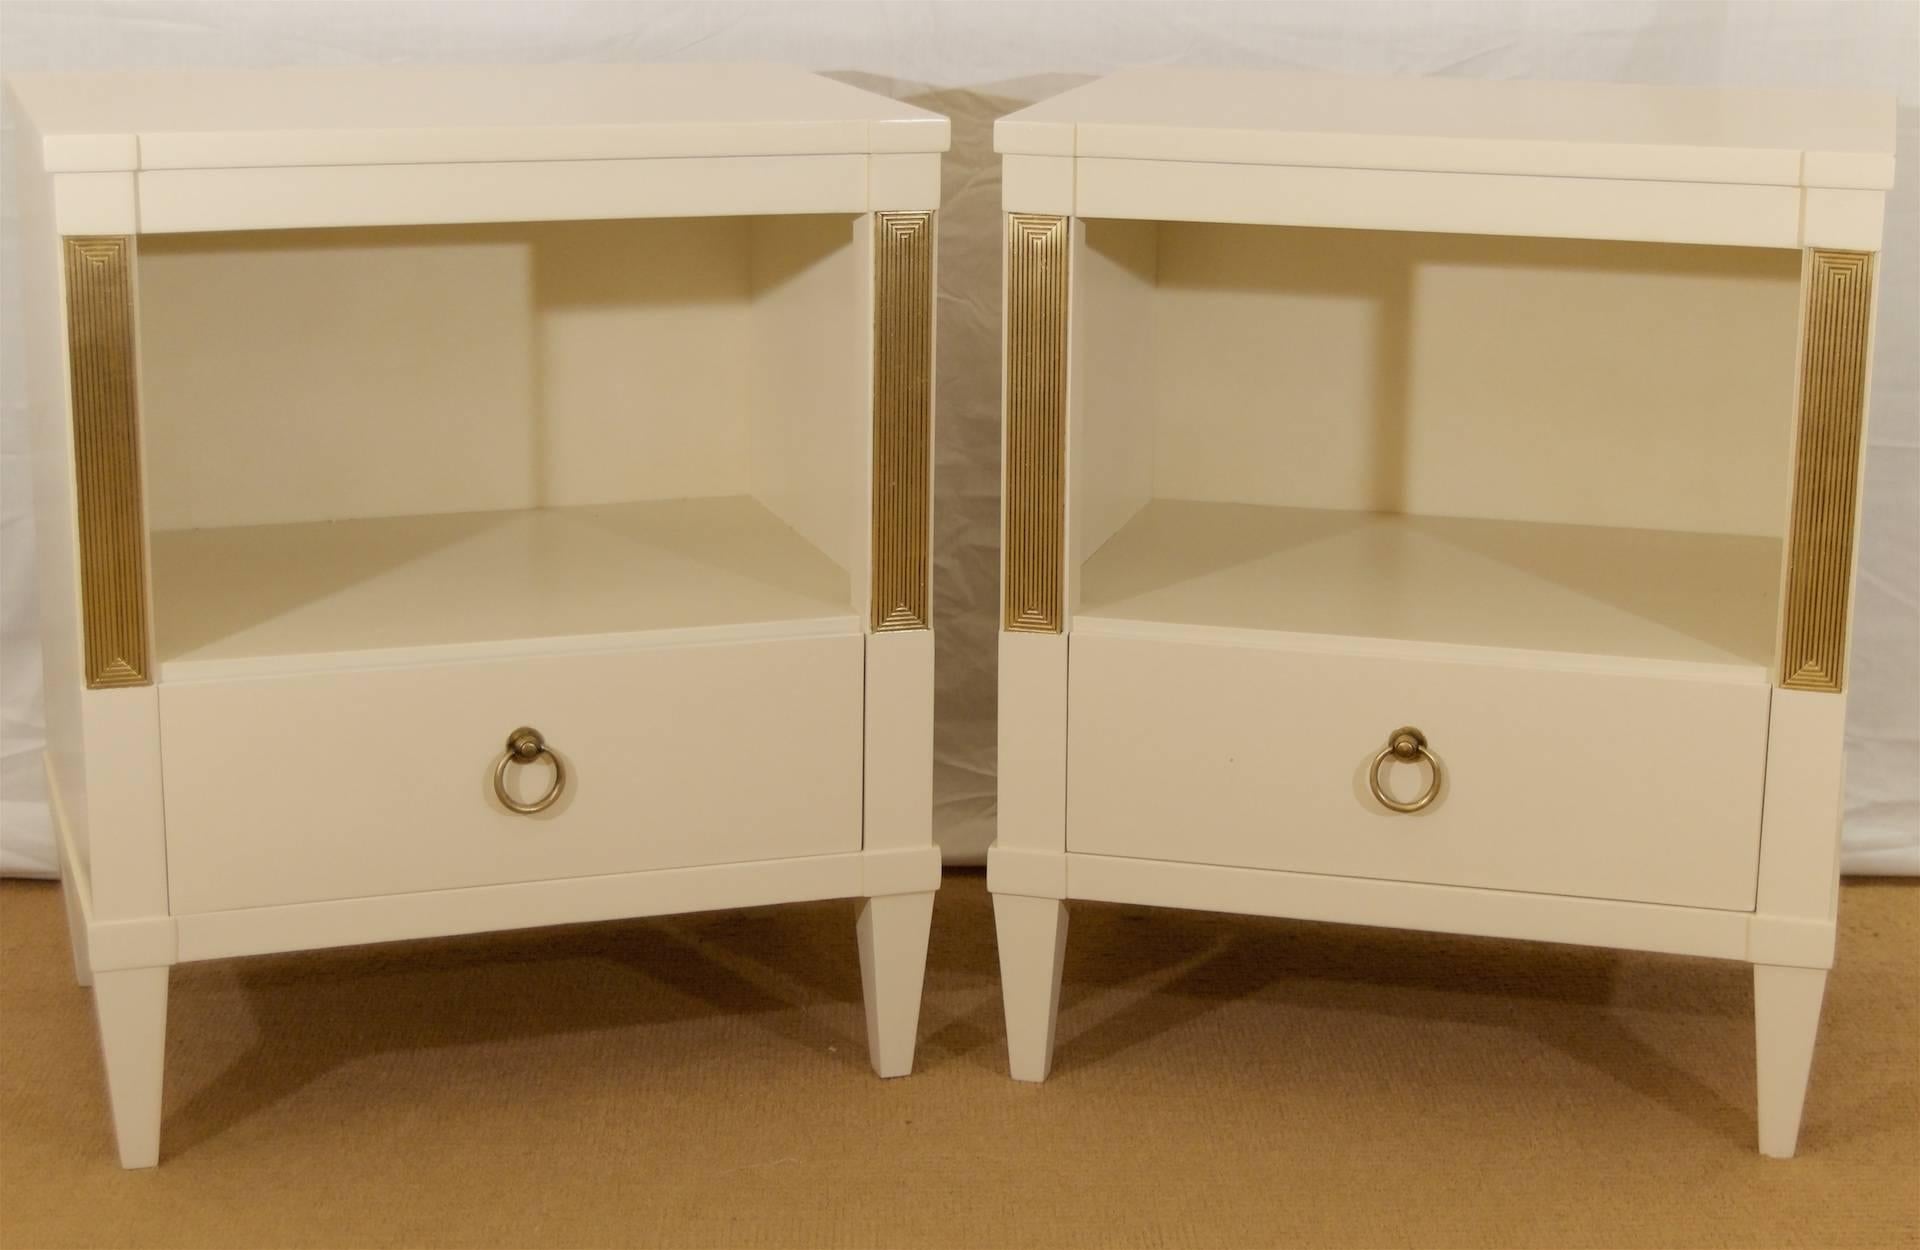 Classically formed nightstands or end tables by John Stuart. Newly relacquered in a satin muslin tone, with gilt and patinaed accents to the pilasters framing the central open storage area. Lower drawer with original brass pulls, patinaed to match